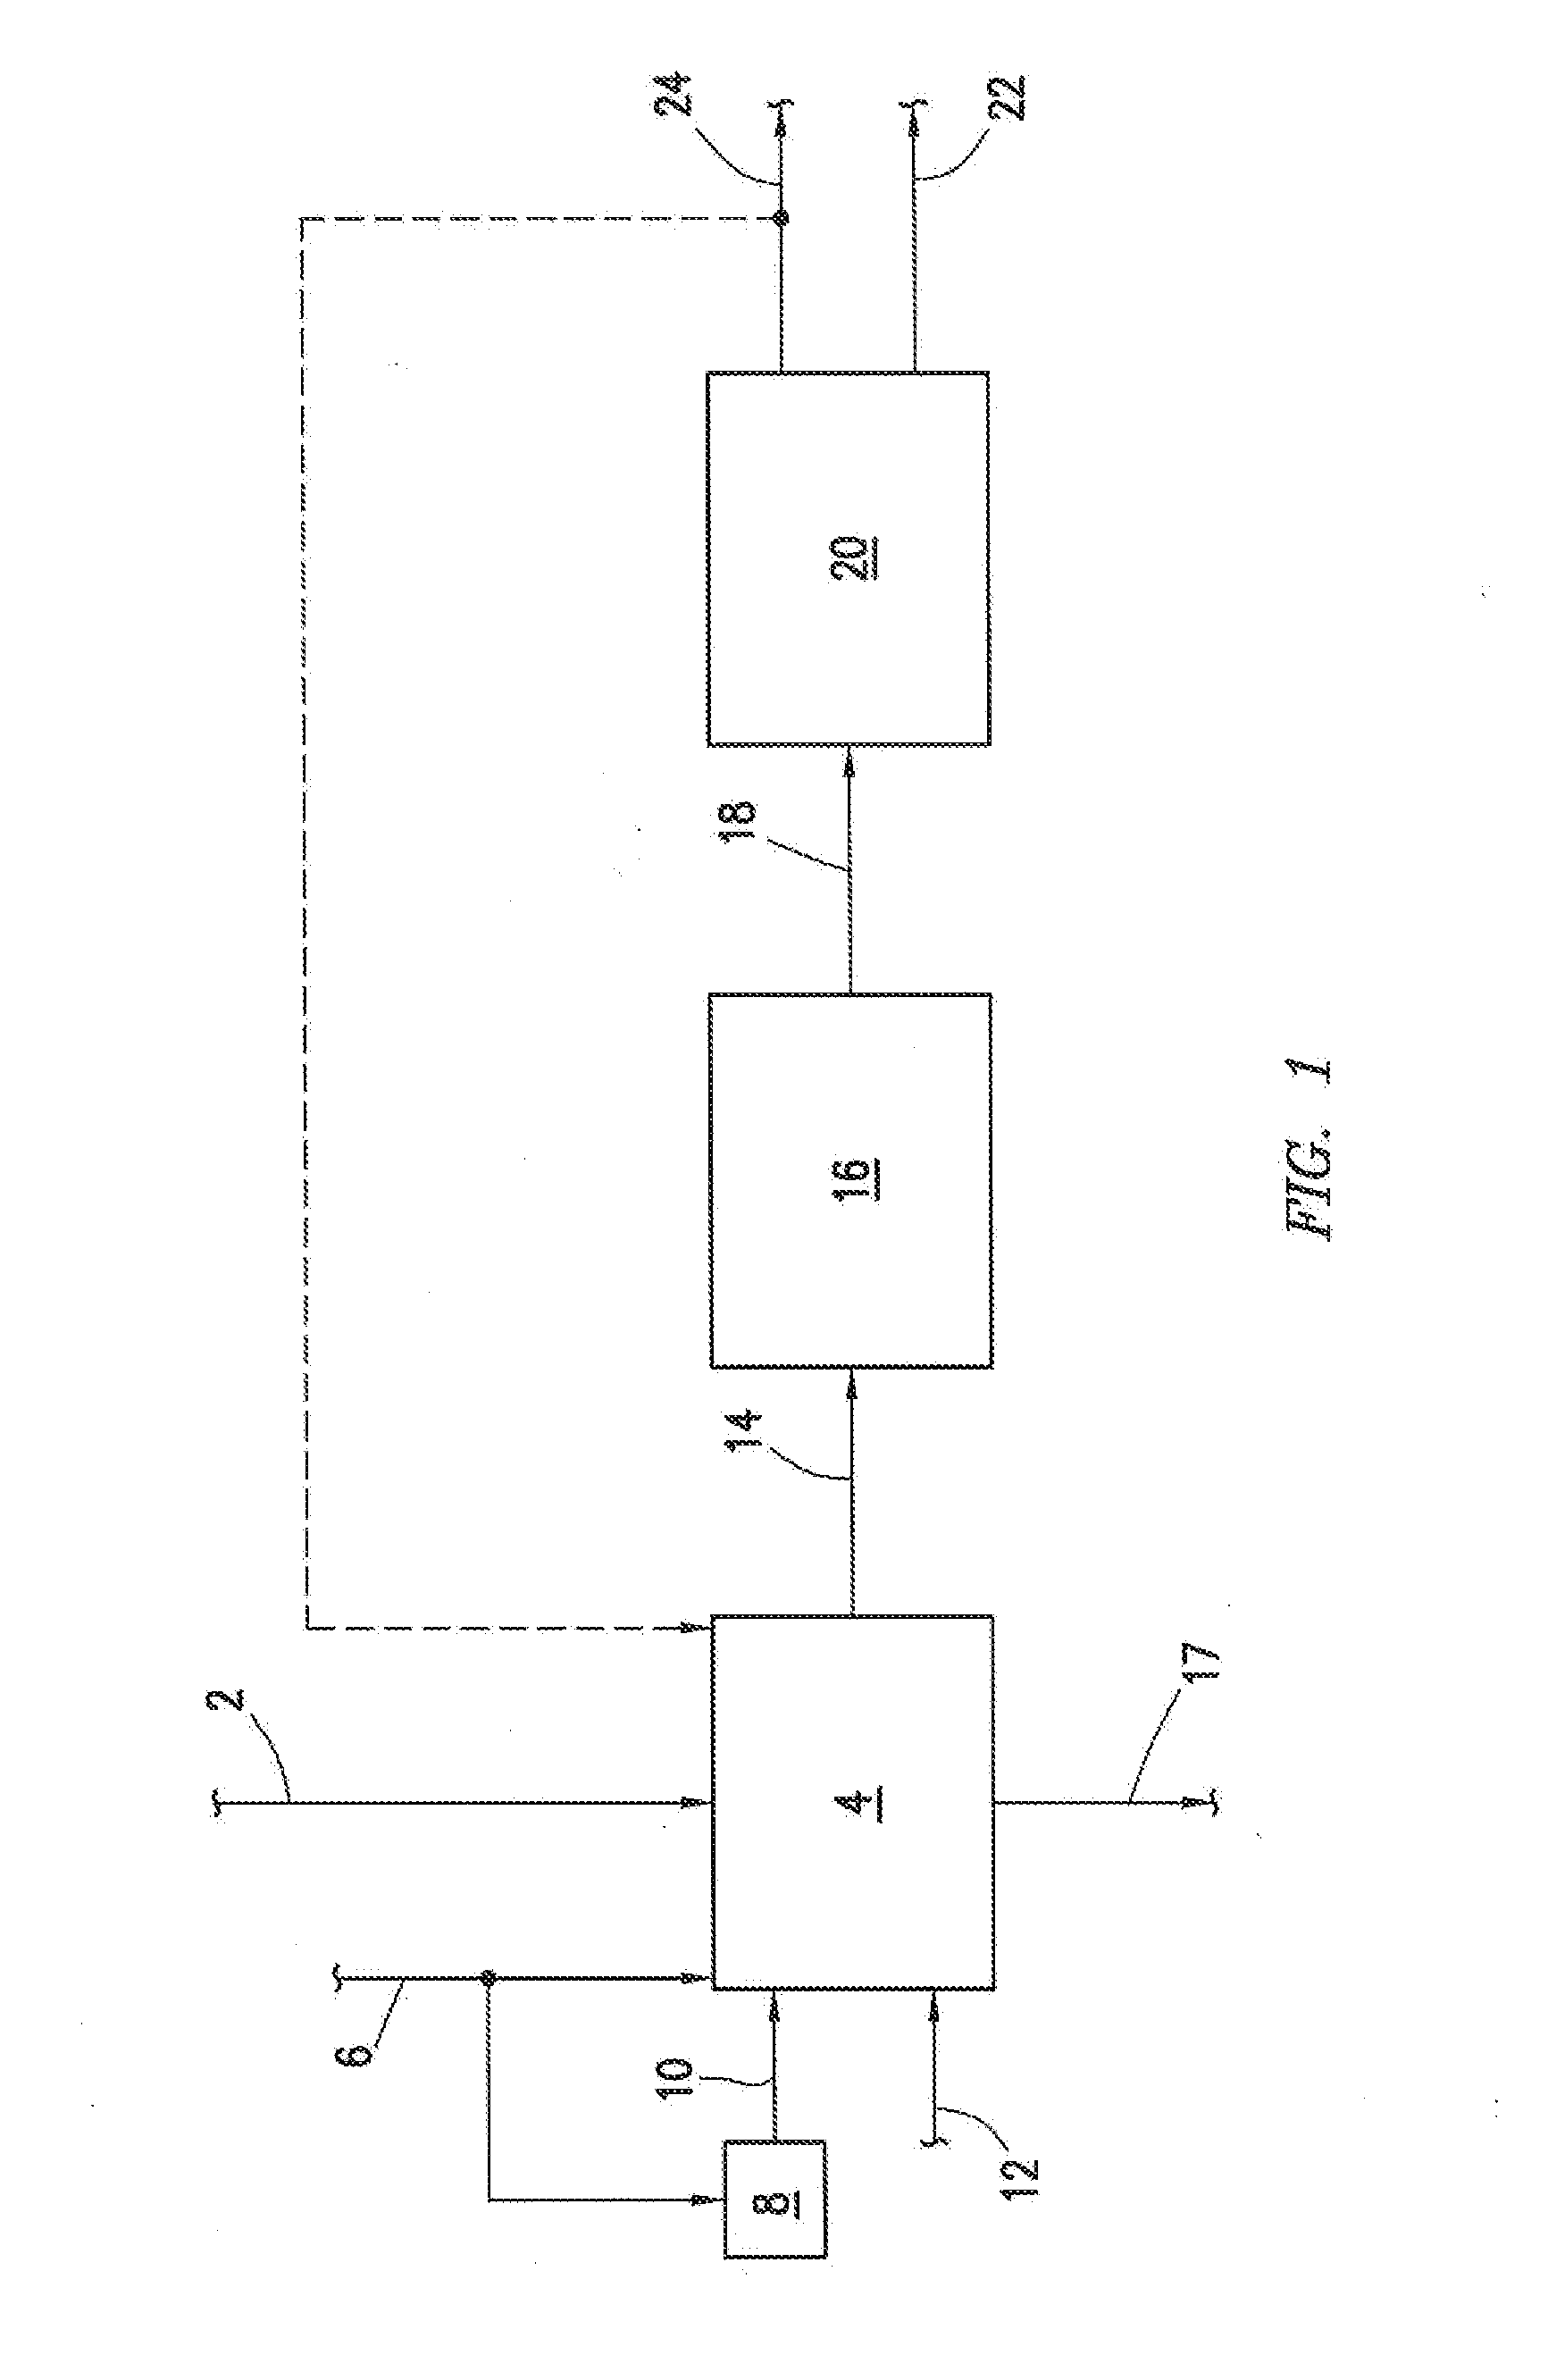 Process for enabling carbon-capture from existing combustion processes